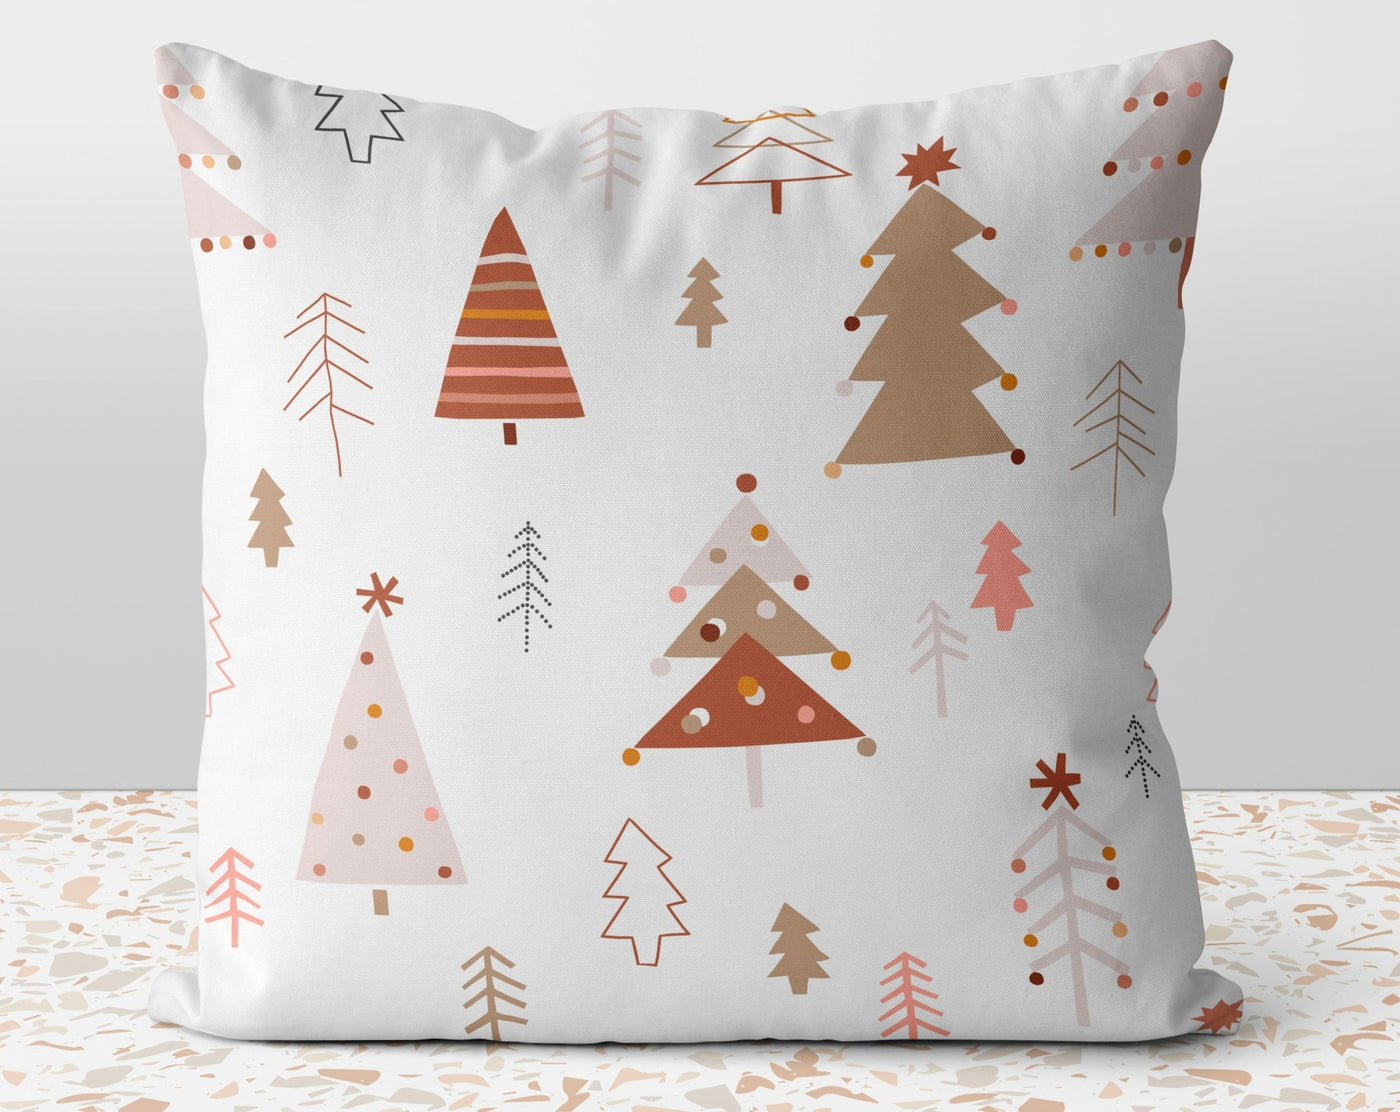 Christmas Happy Holidays Festive Trees Pillow Throw Cover with Insert - Cush Potato Pillows